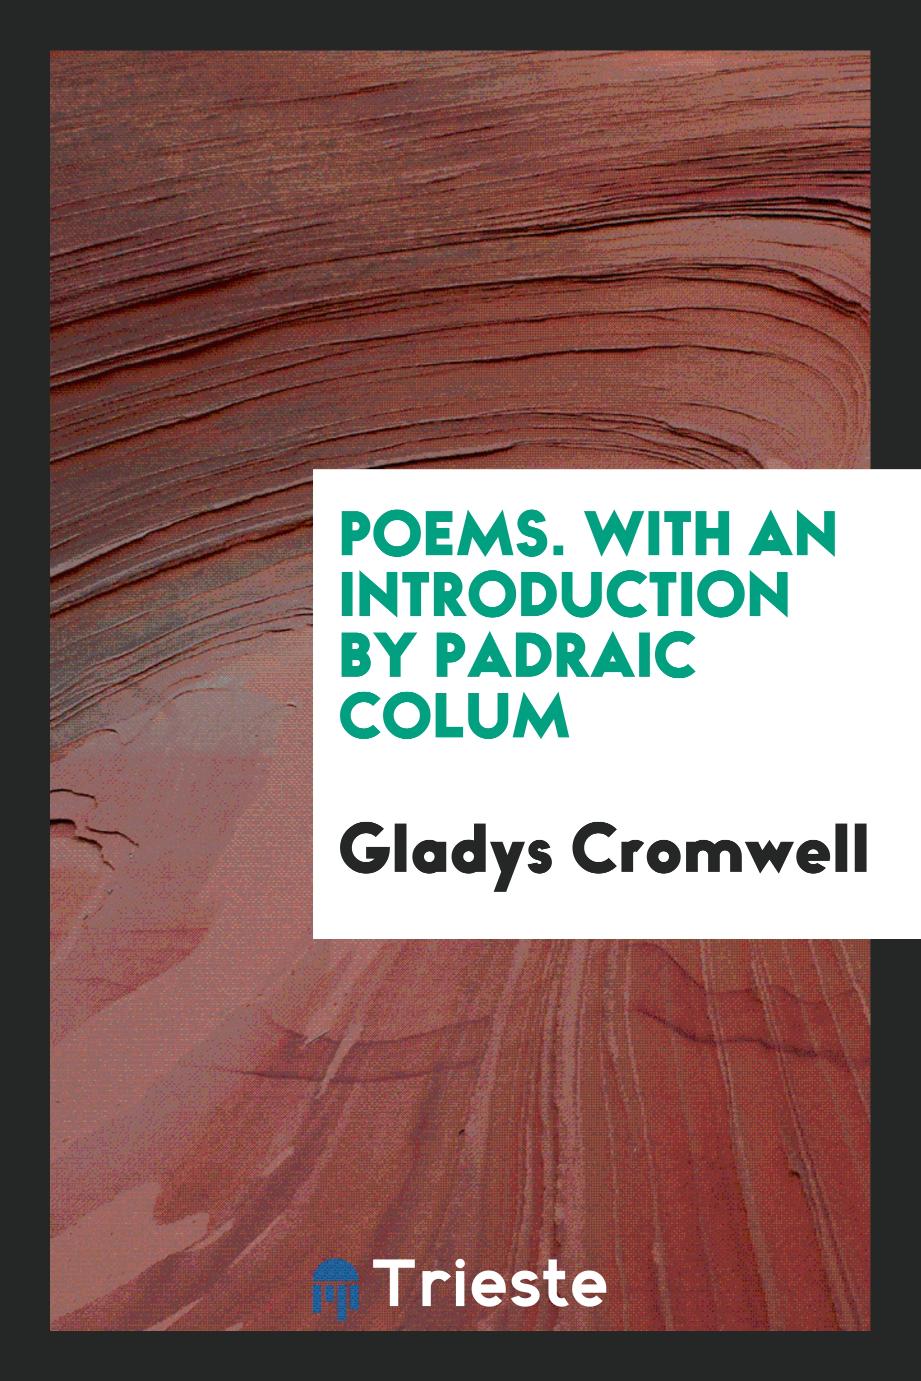 Poems. With an Introduction by Padraic Colum